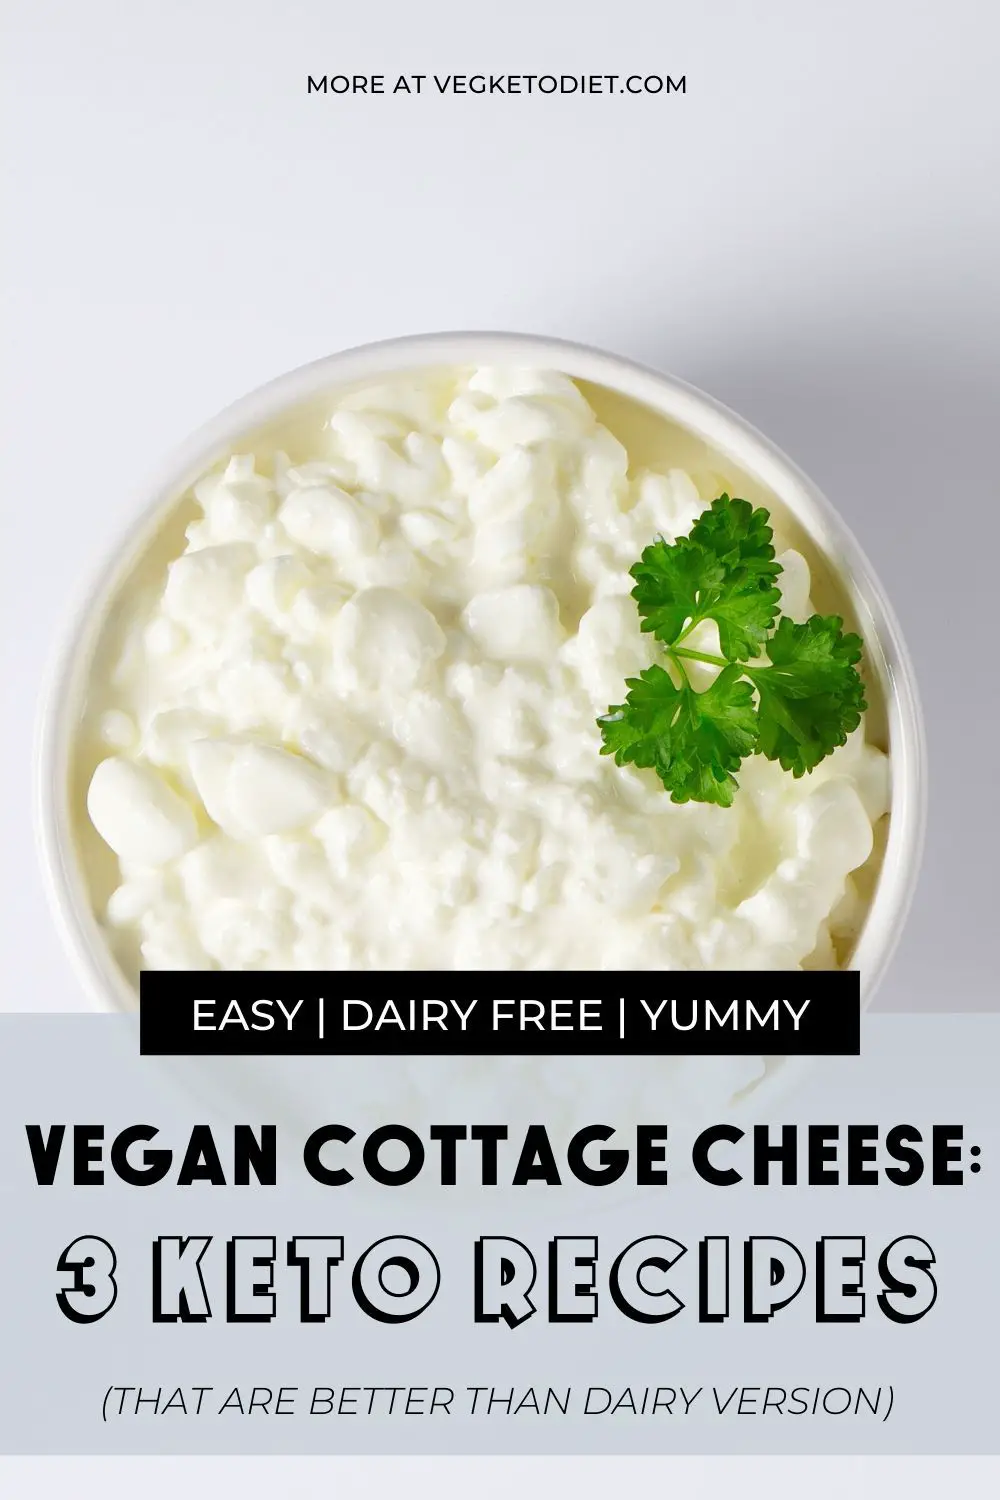 Vegan Cottage Cheese: 3 Keto Recipes Better Than Dairy Version